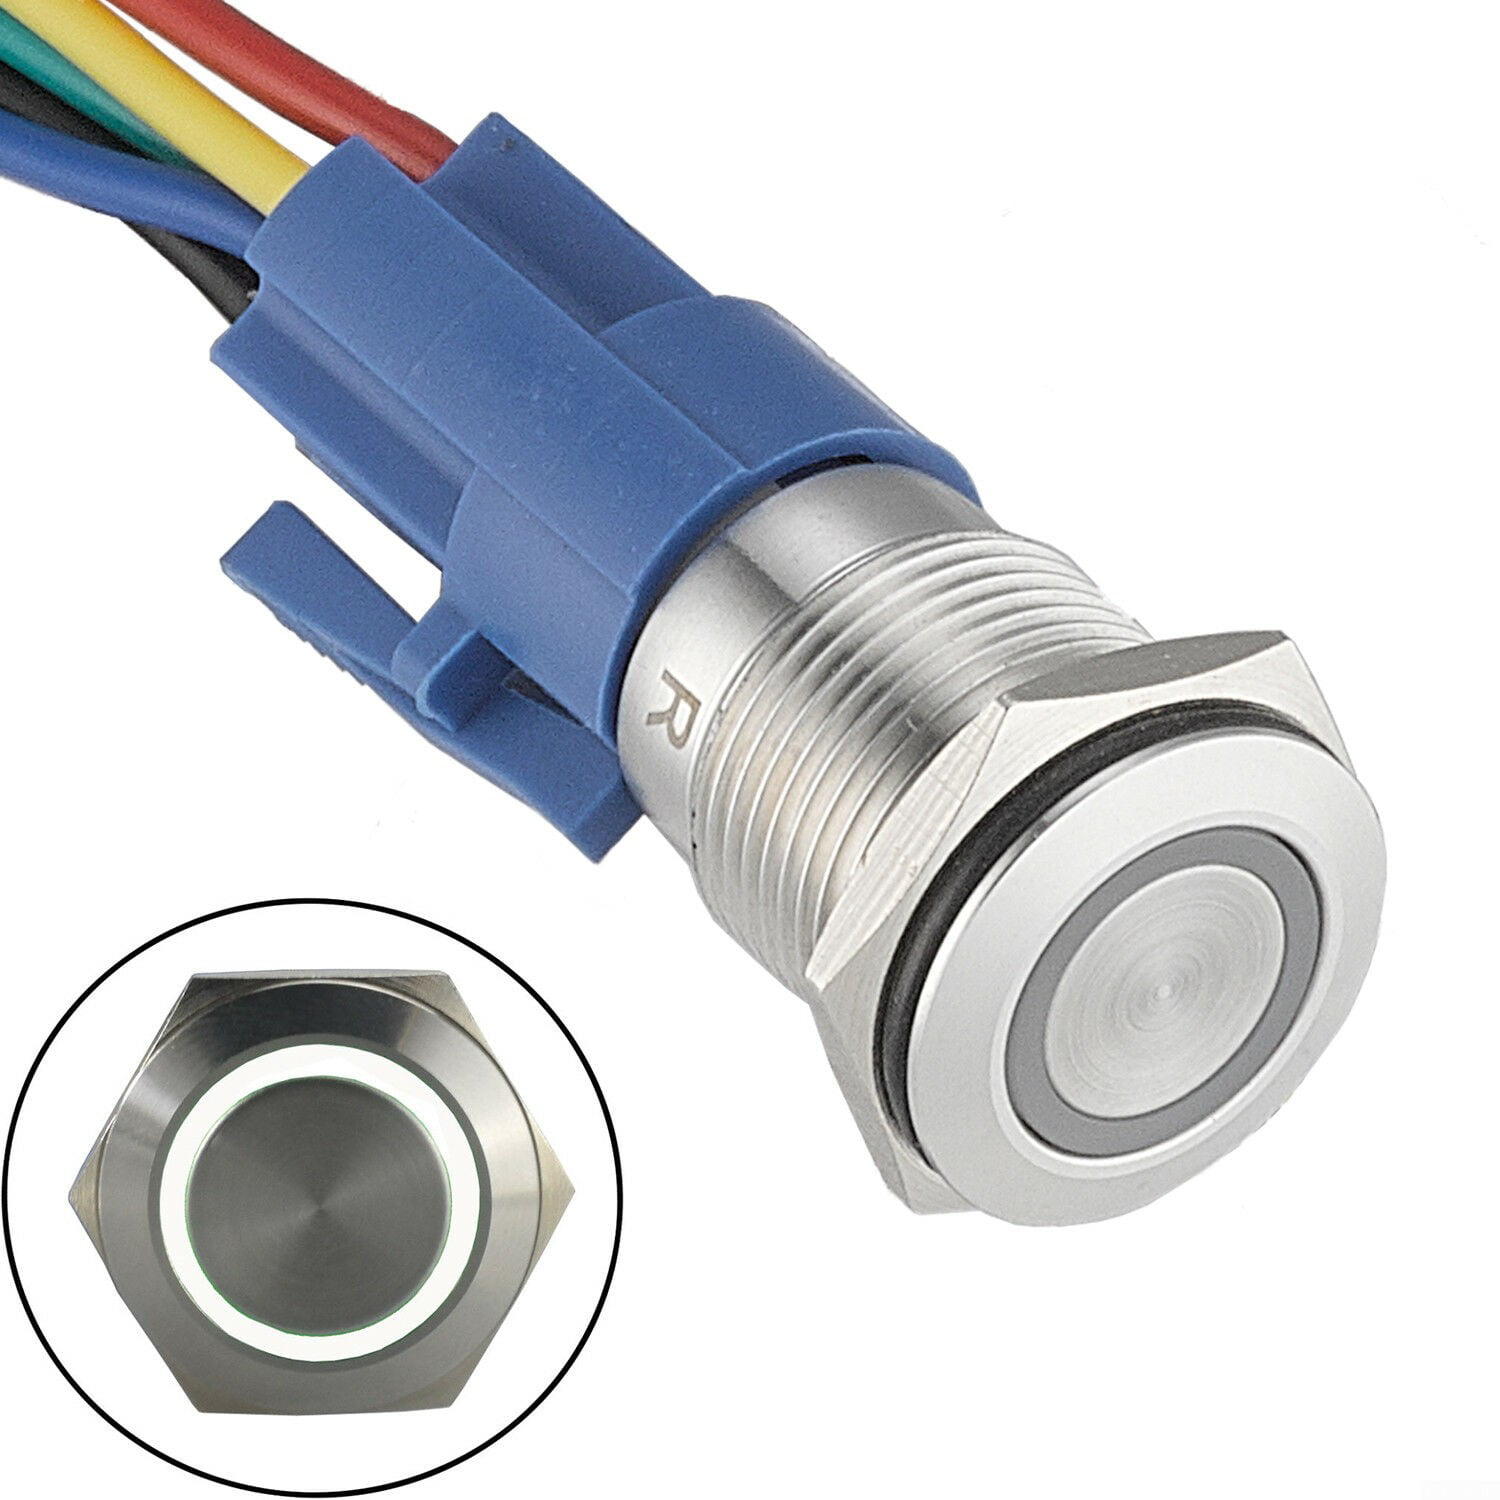 16mm 12V LED Momentary Push Button Stainless Steel Power Switch Blue 